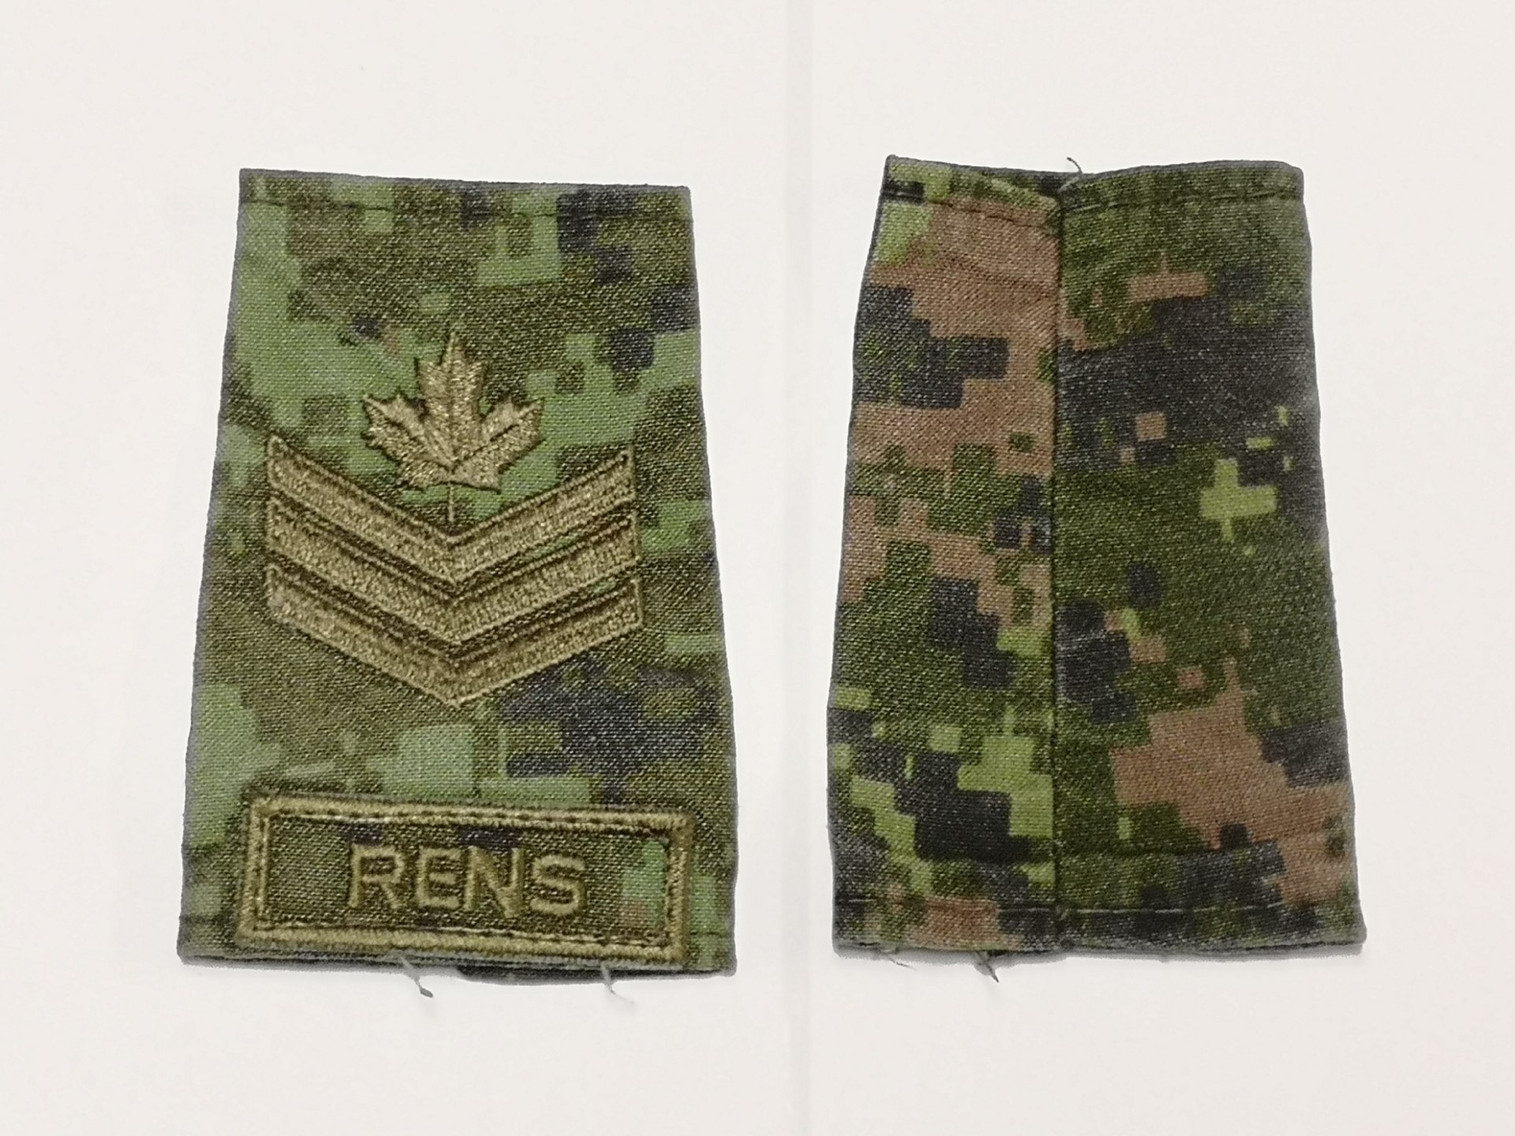 Canadian Armed Forces Cadpat Rank Epaulets RENS - Sergeant